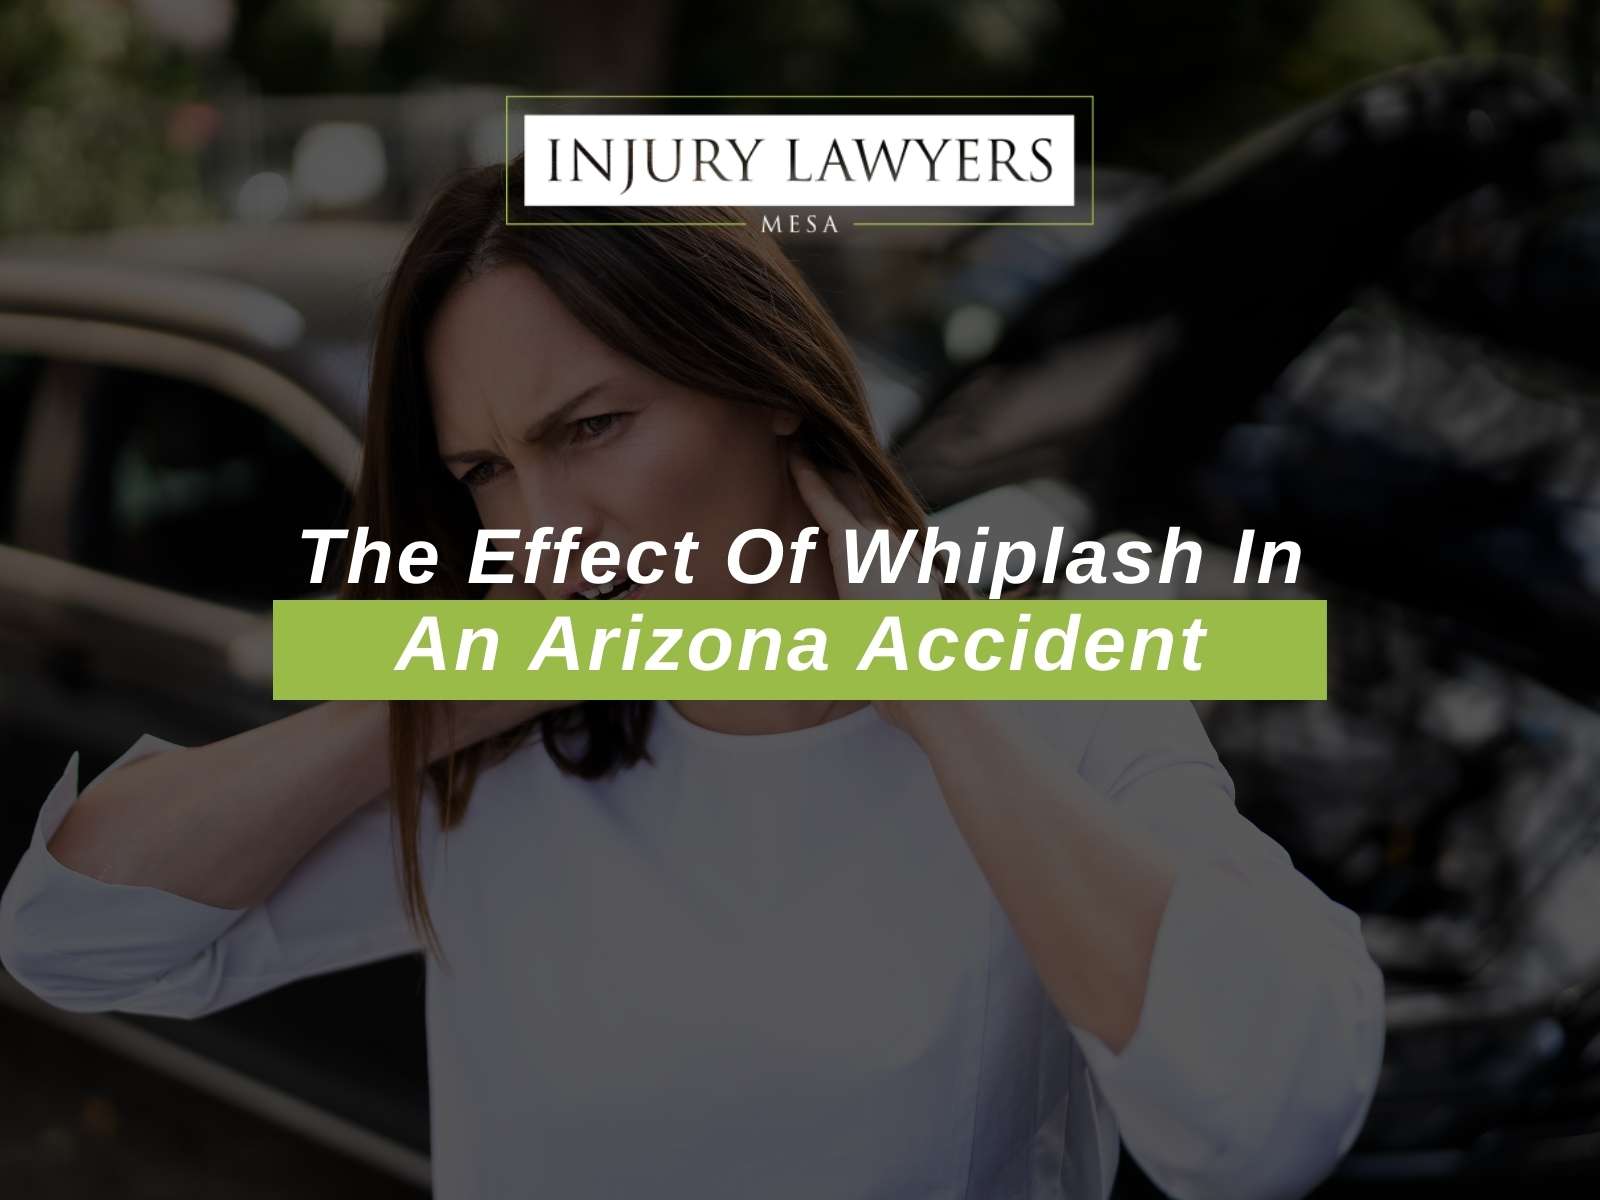 The Effect Of Whiplash In An Arizona Accident